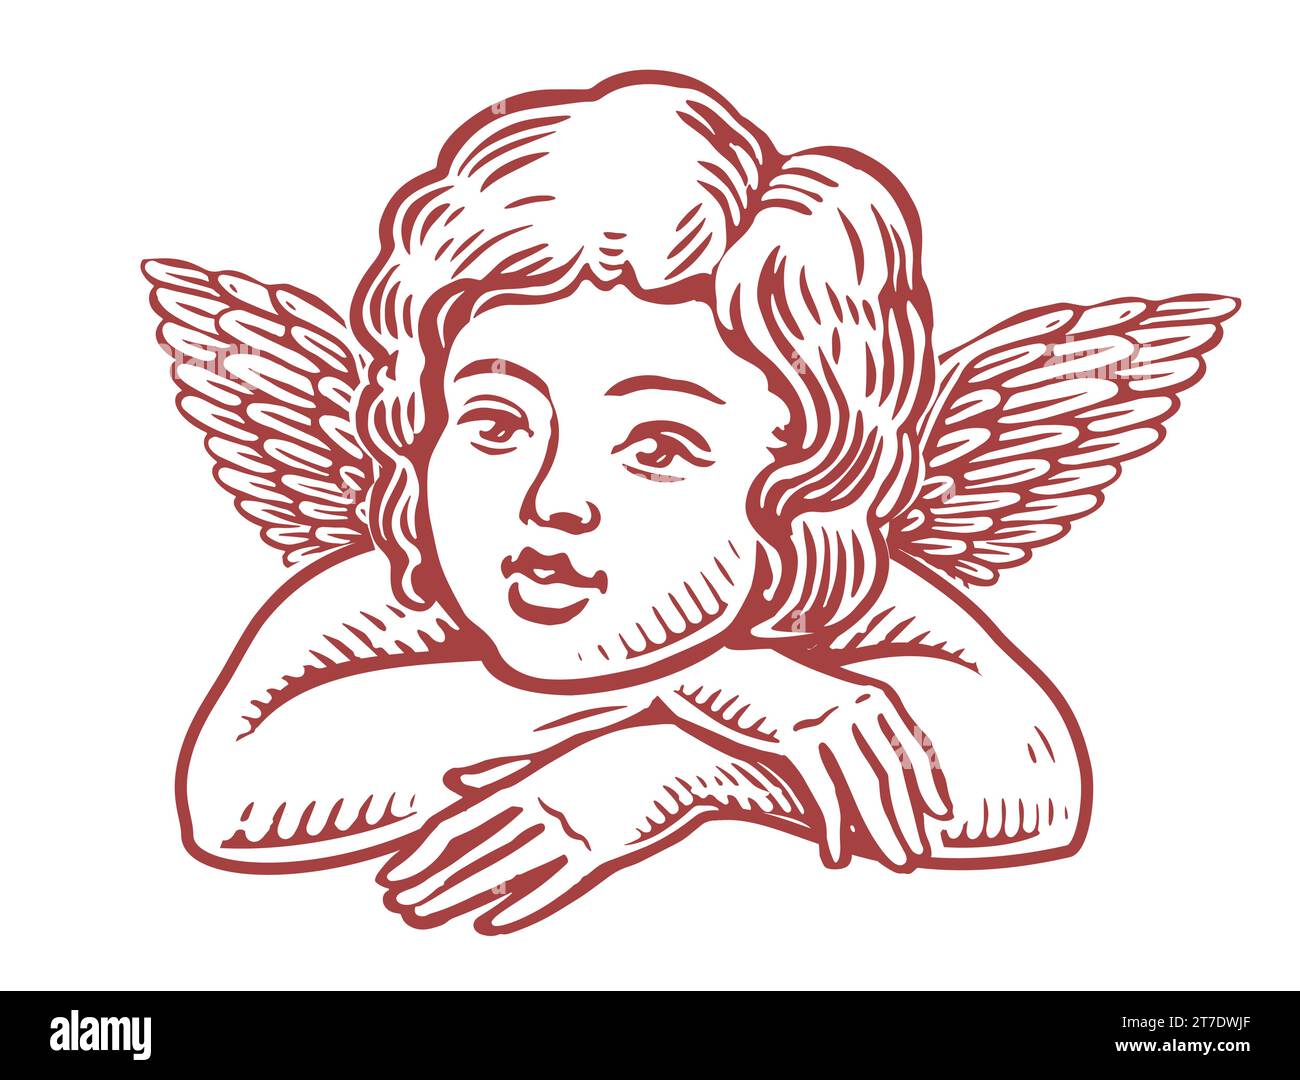 Cute baby with wings. Little angel retro style engraving. Black and white vector illustration Stock Vector